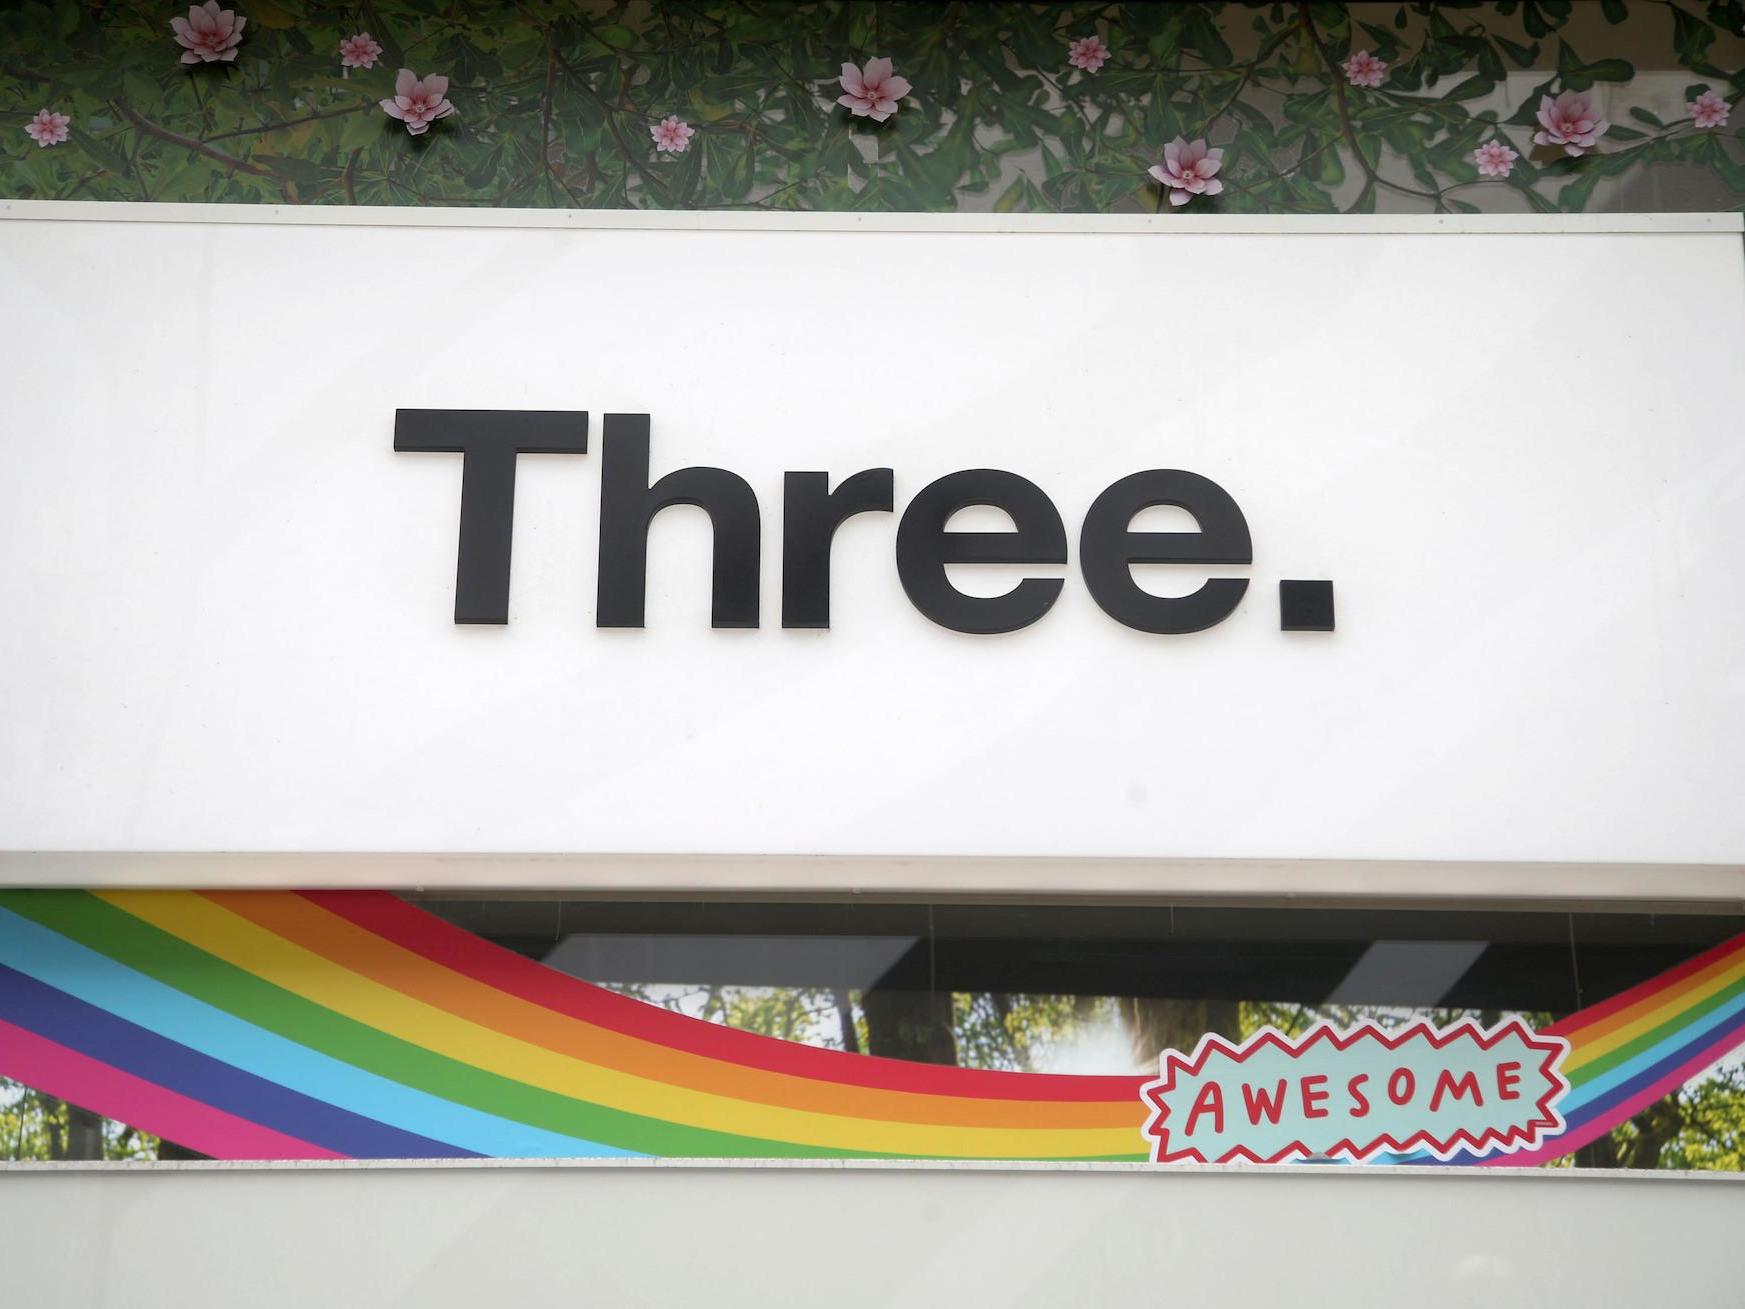 Mobile network Three has confirmed it will launch its 5G network in August and plans to reach 25 UK towns and cities before the end of 2019